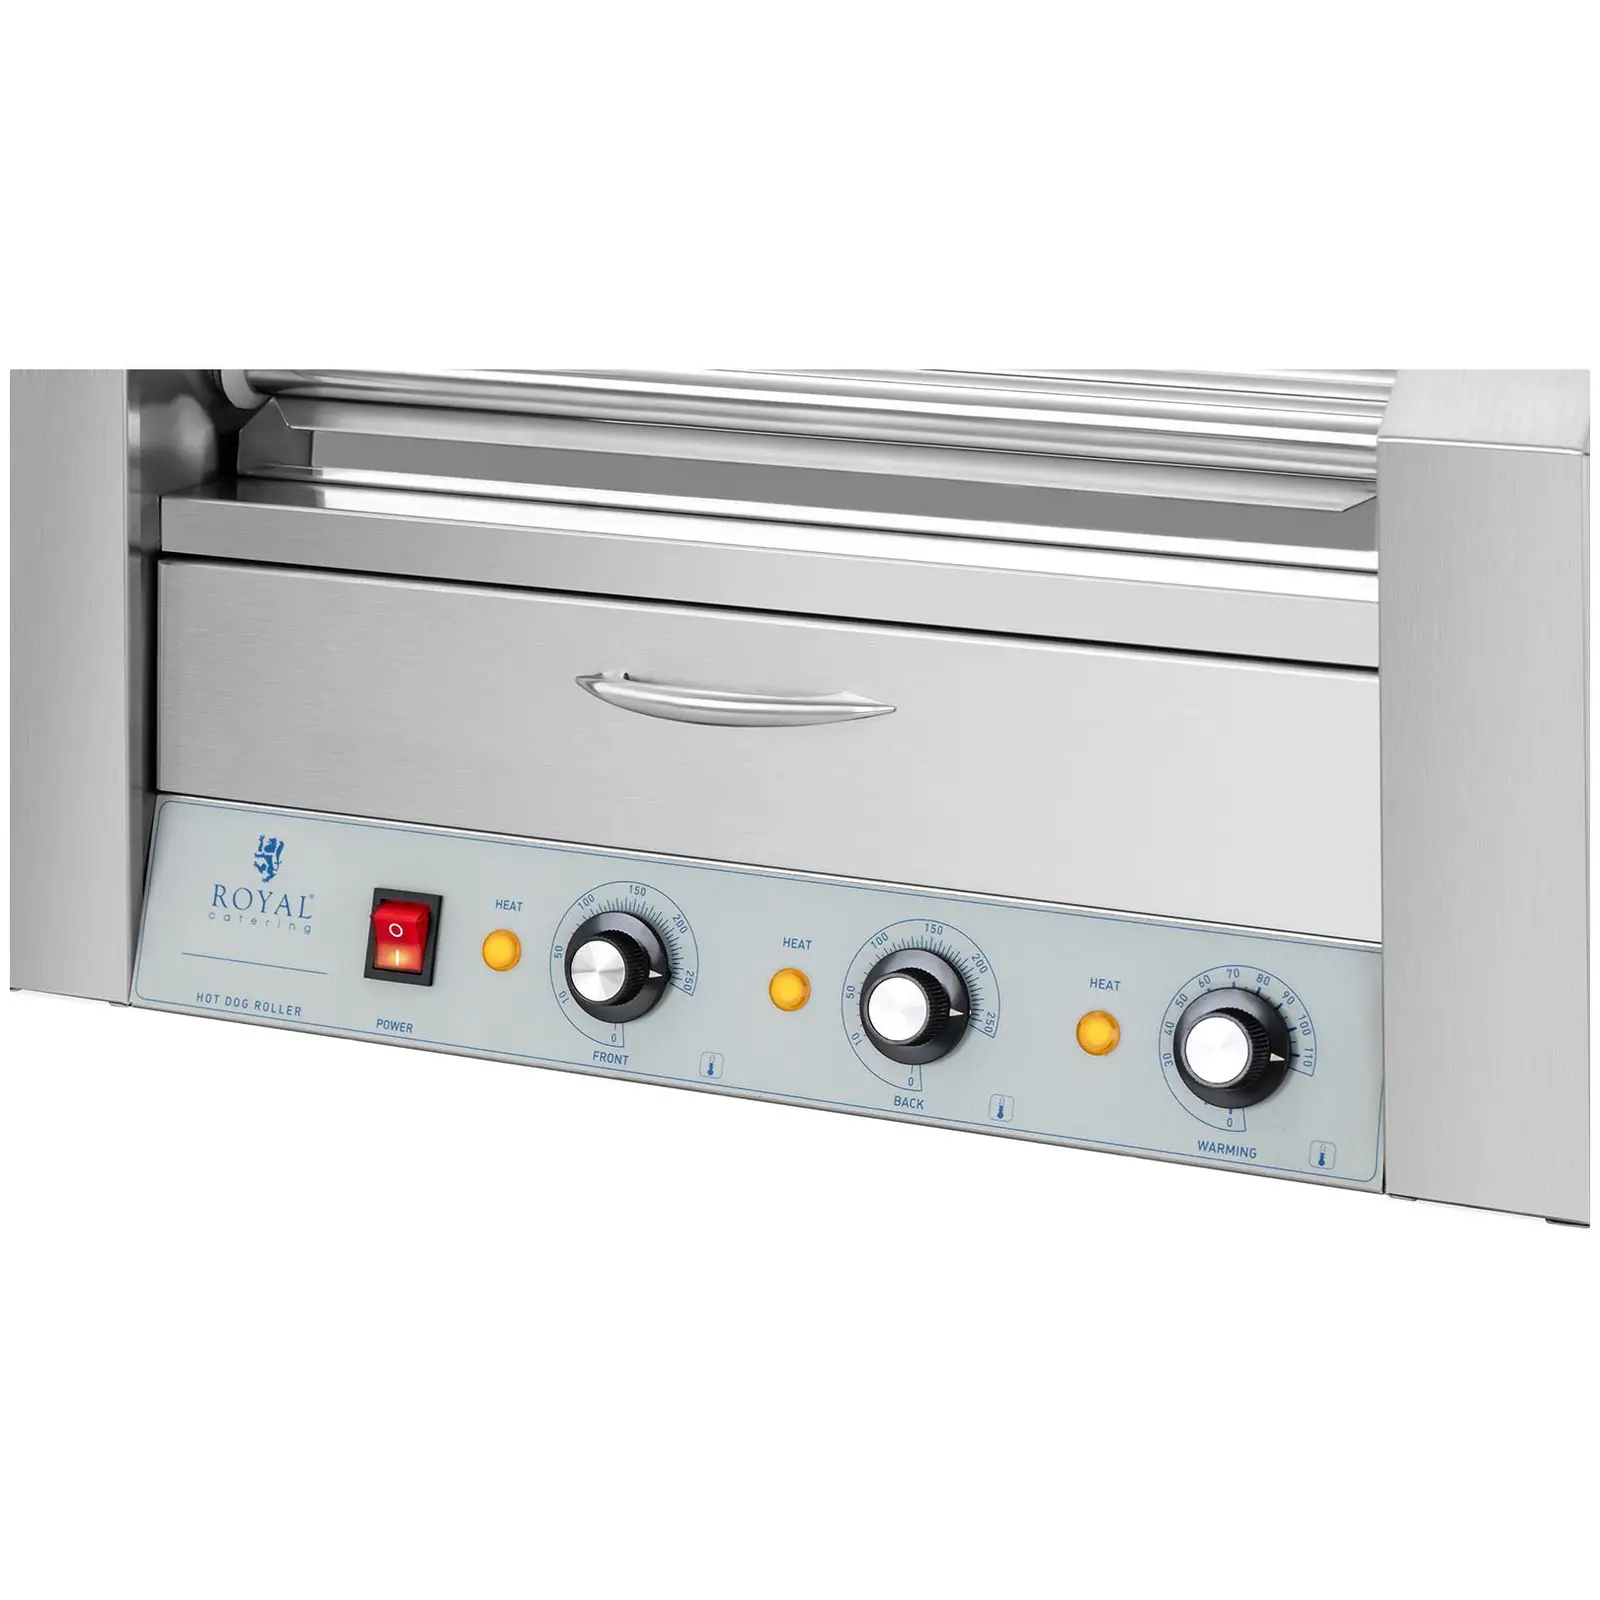 Hot Dog Grill - 5 rollers - warming drawer - stainless steel